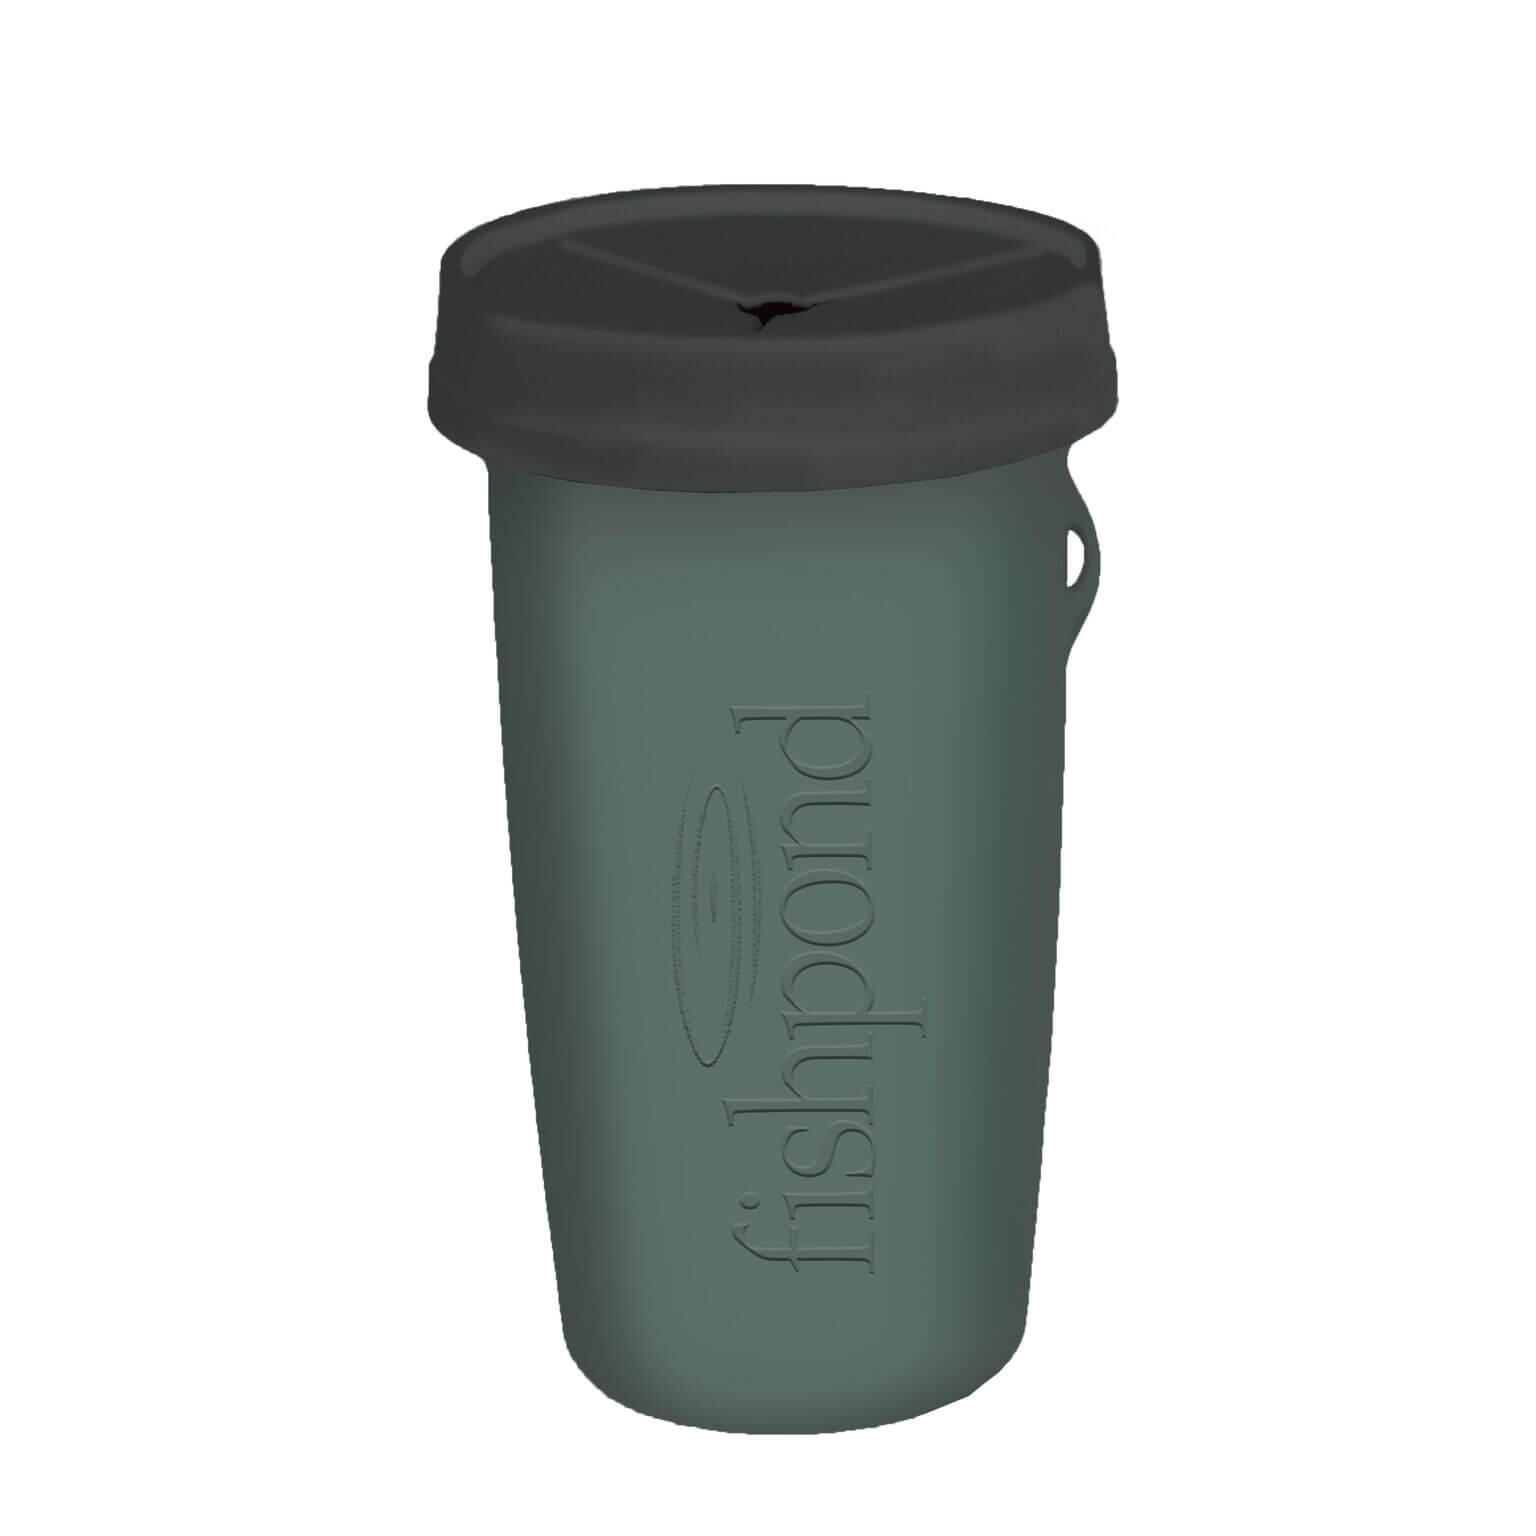 Fishpond Largemouth Microtrash Container